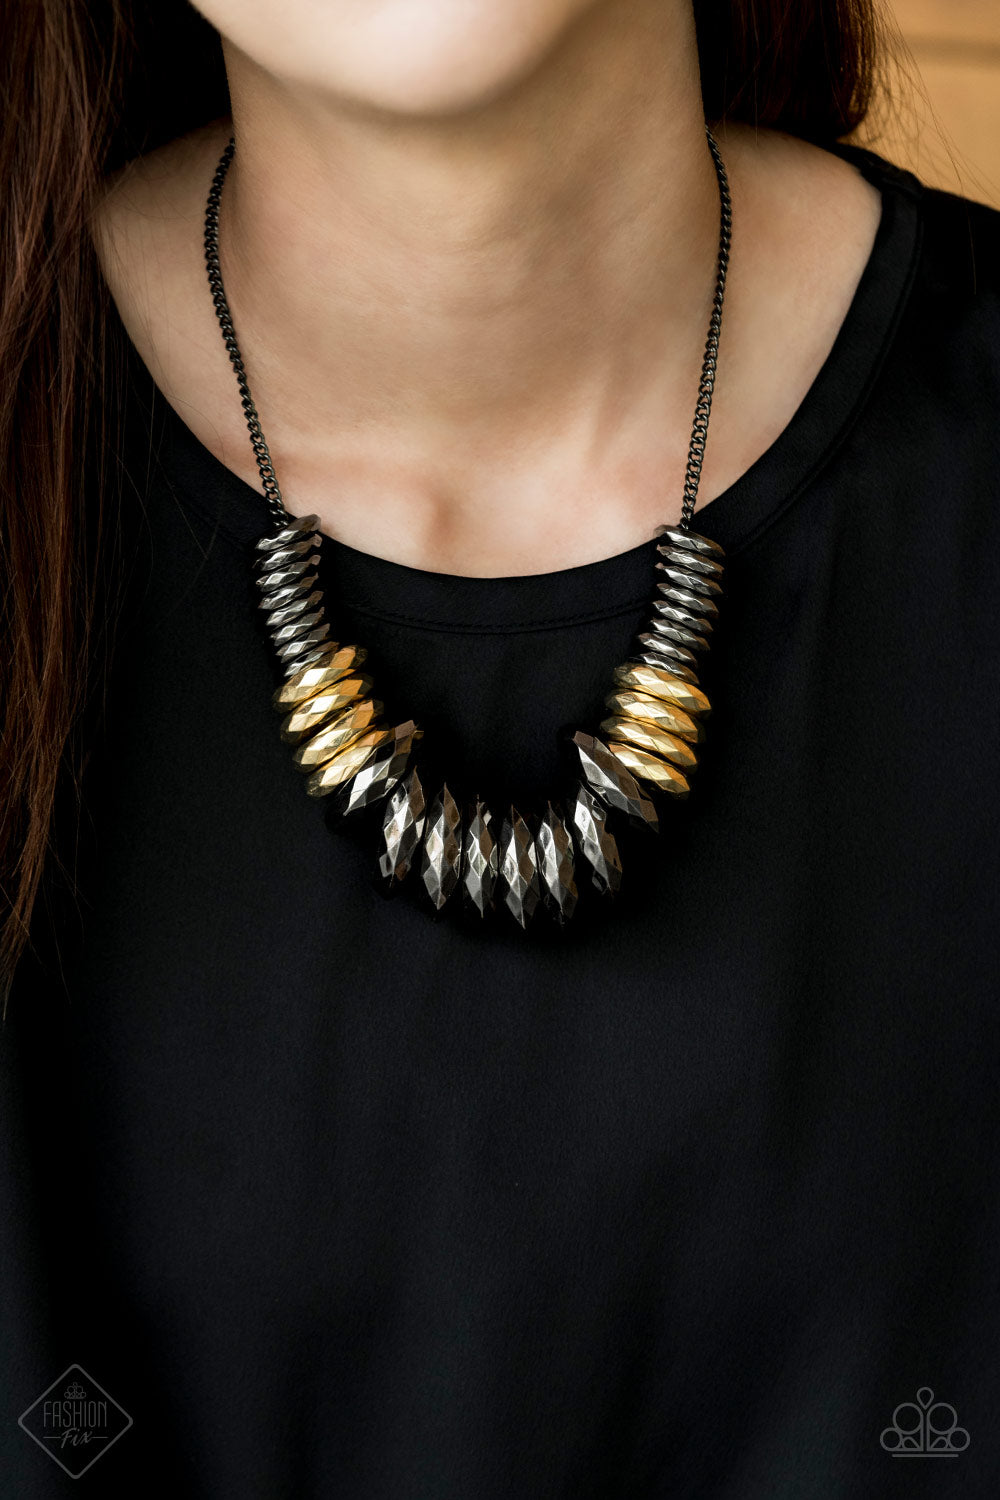 Haute Hardware - Gold and Black Necklace - Paparazzi Accessories - Gradually increasing in size, a collision of faceted gunmetal and gold rings slides along a classic gunmetal chain below the collar, creating a bold industrial statement piece. Features an adjustable clasp closure. Sold as one individual necklace.